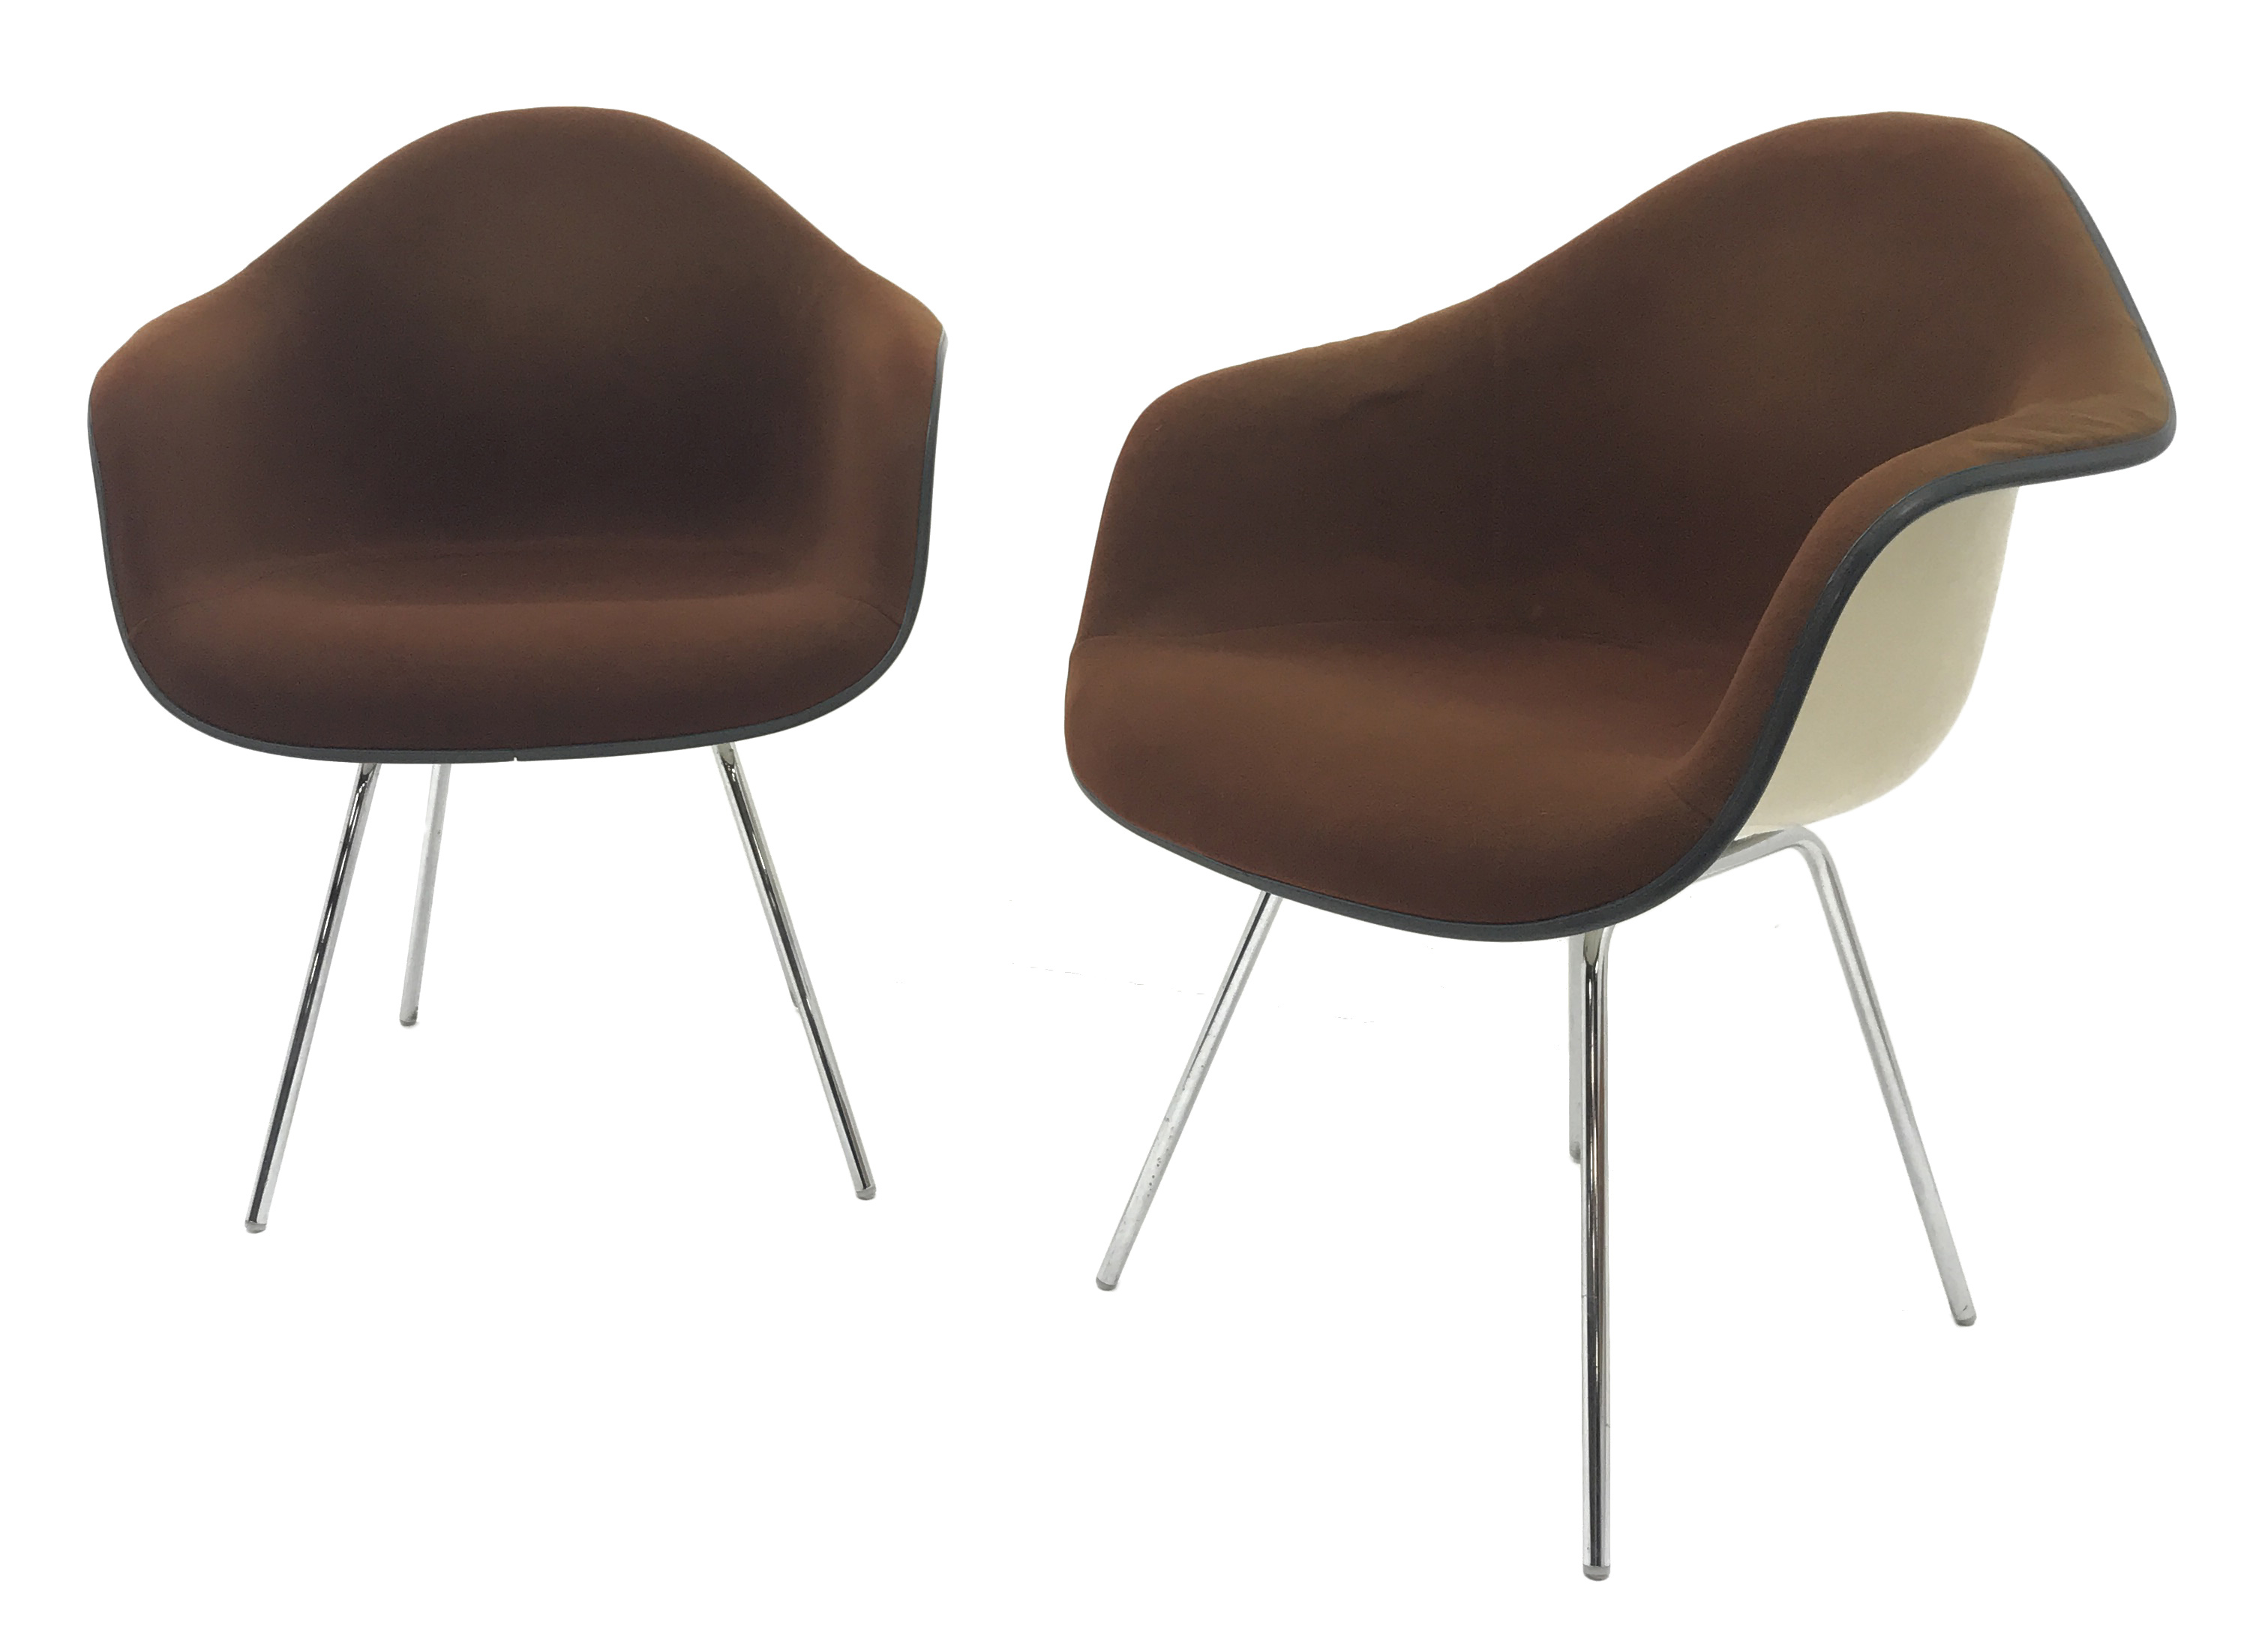 Pair 1970's Charles Eames DAX chairs manufactured by Herman Miller,